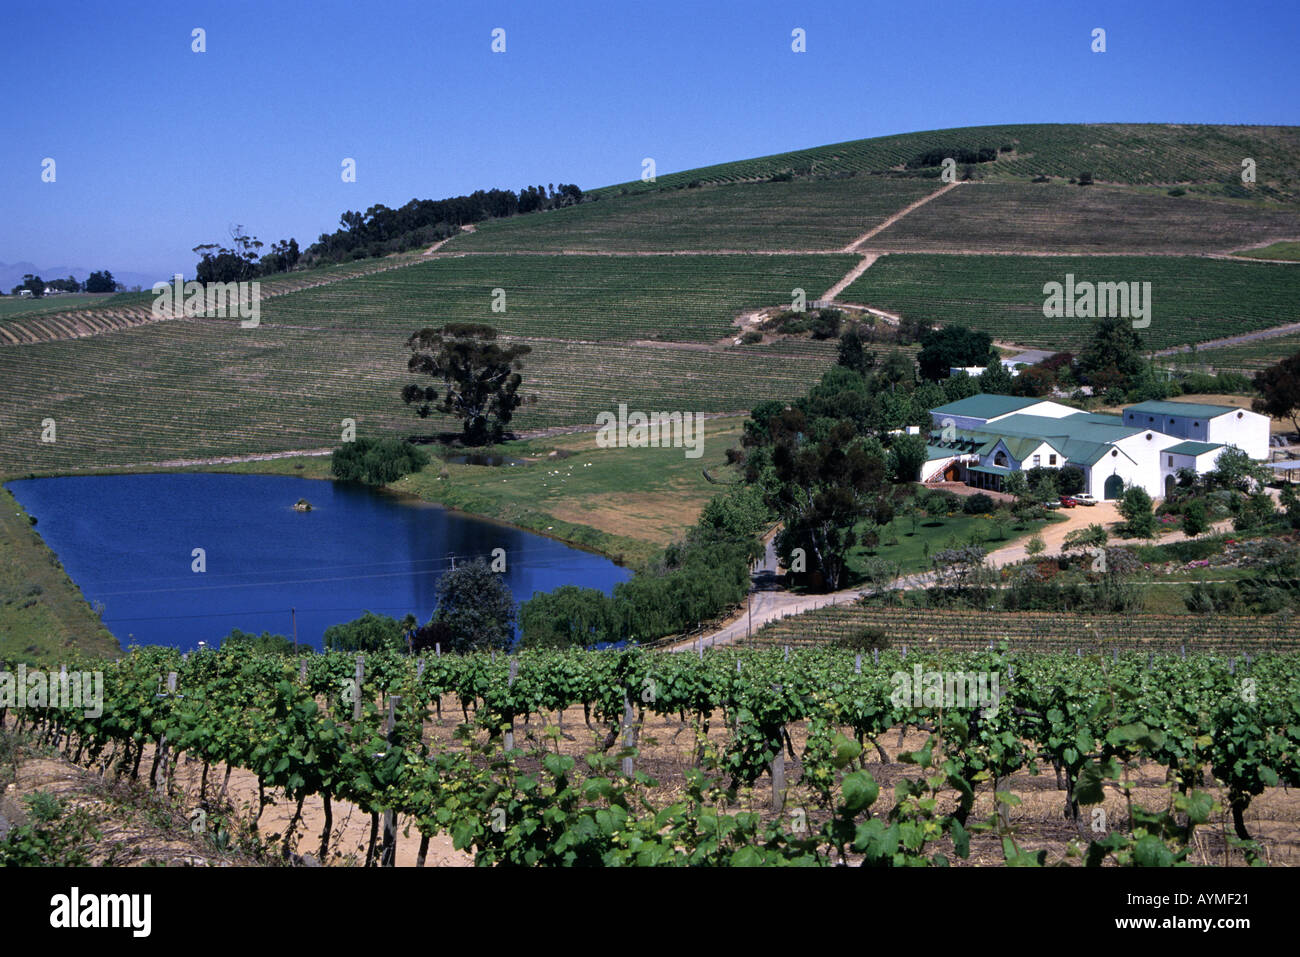 Jordan Wine High Resolution Stock Photography and Images - Alamy